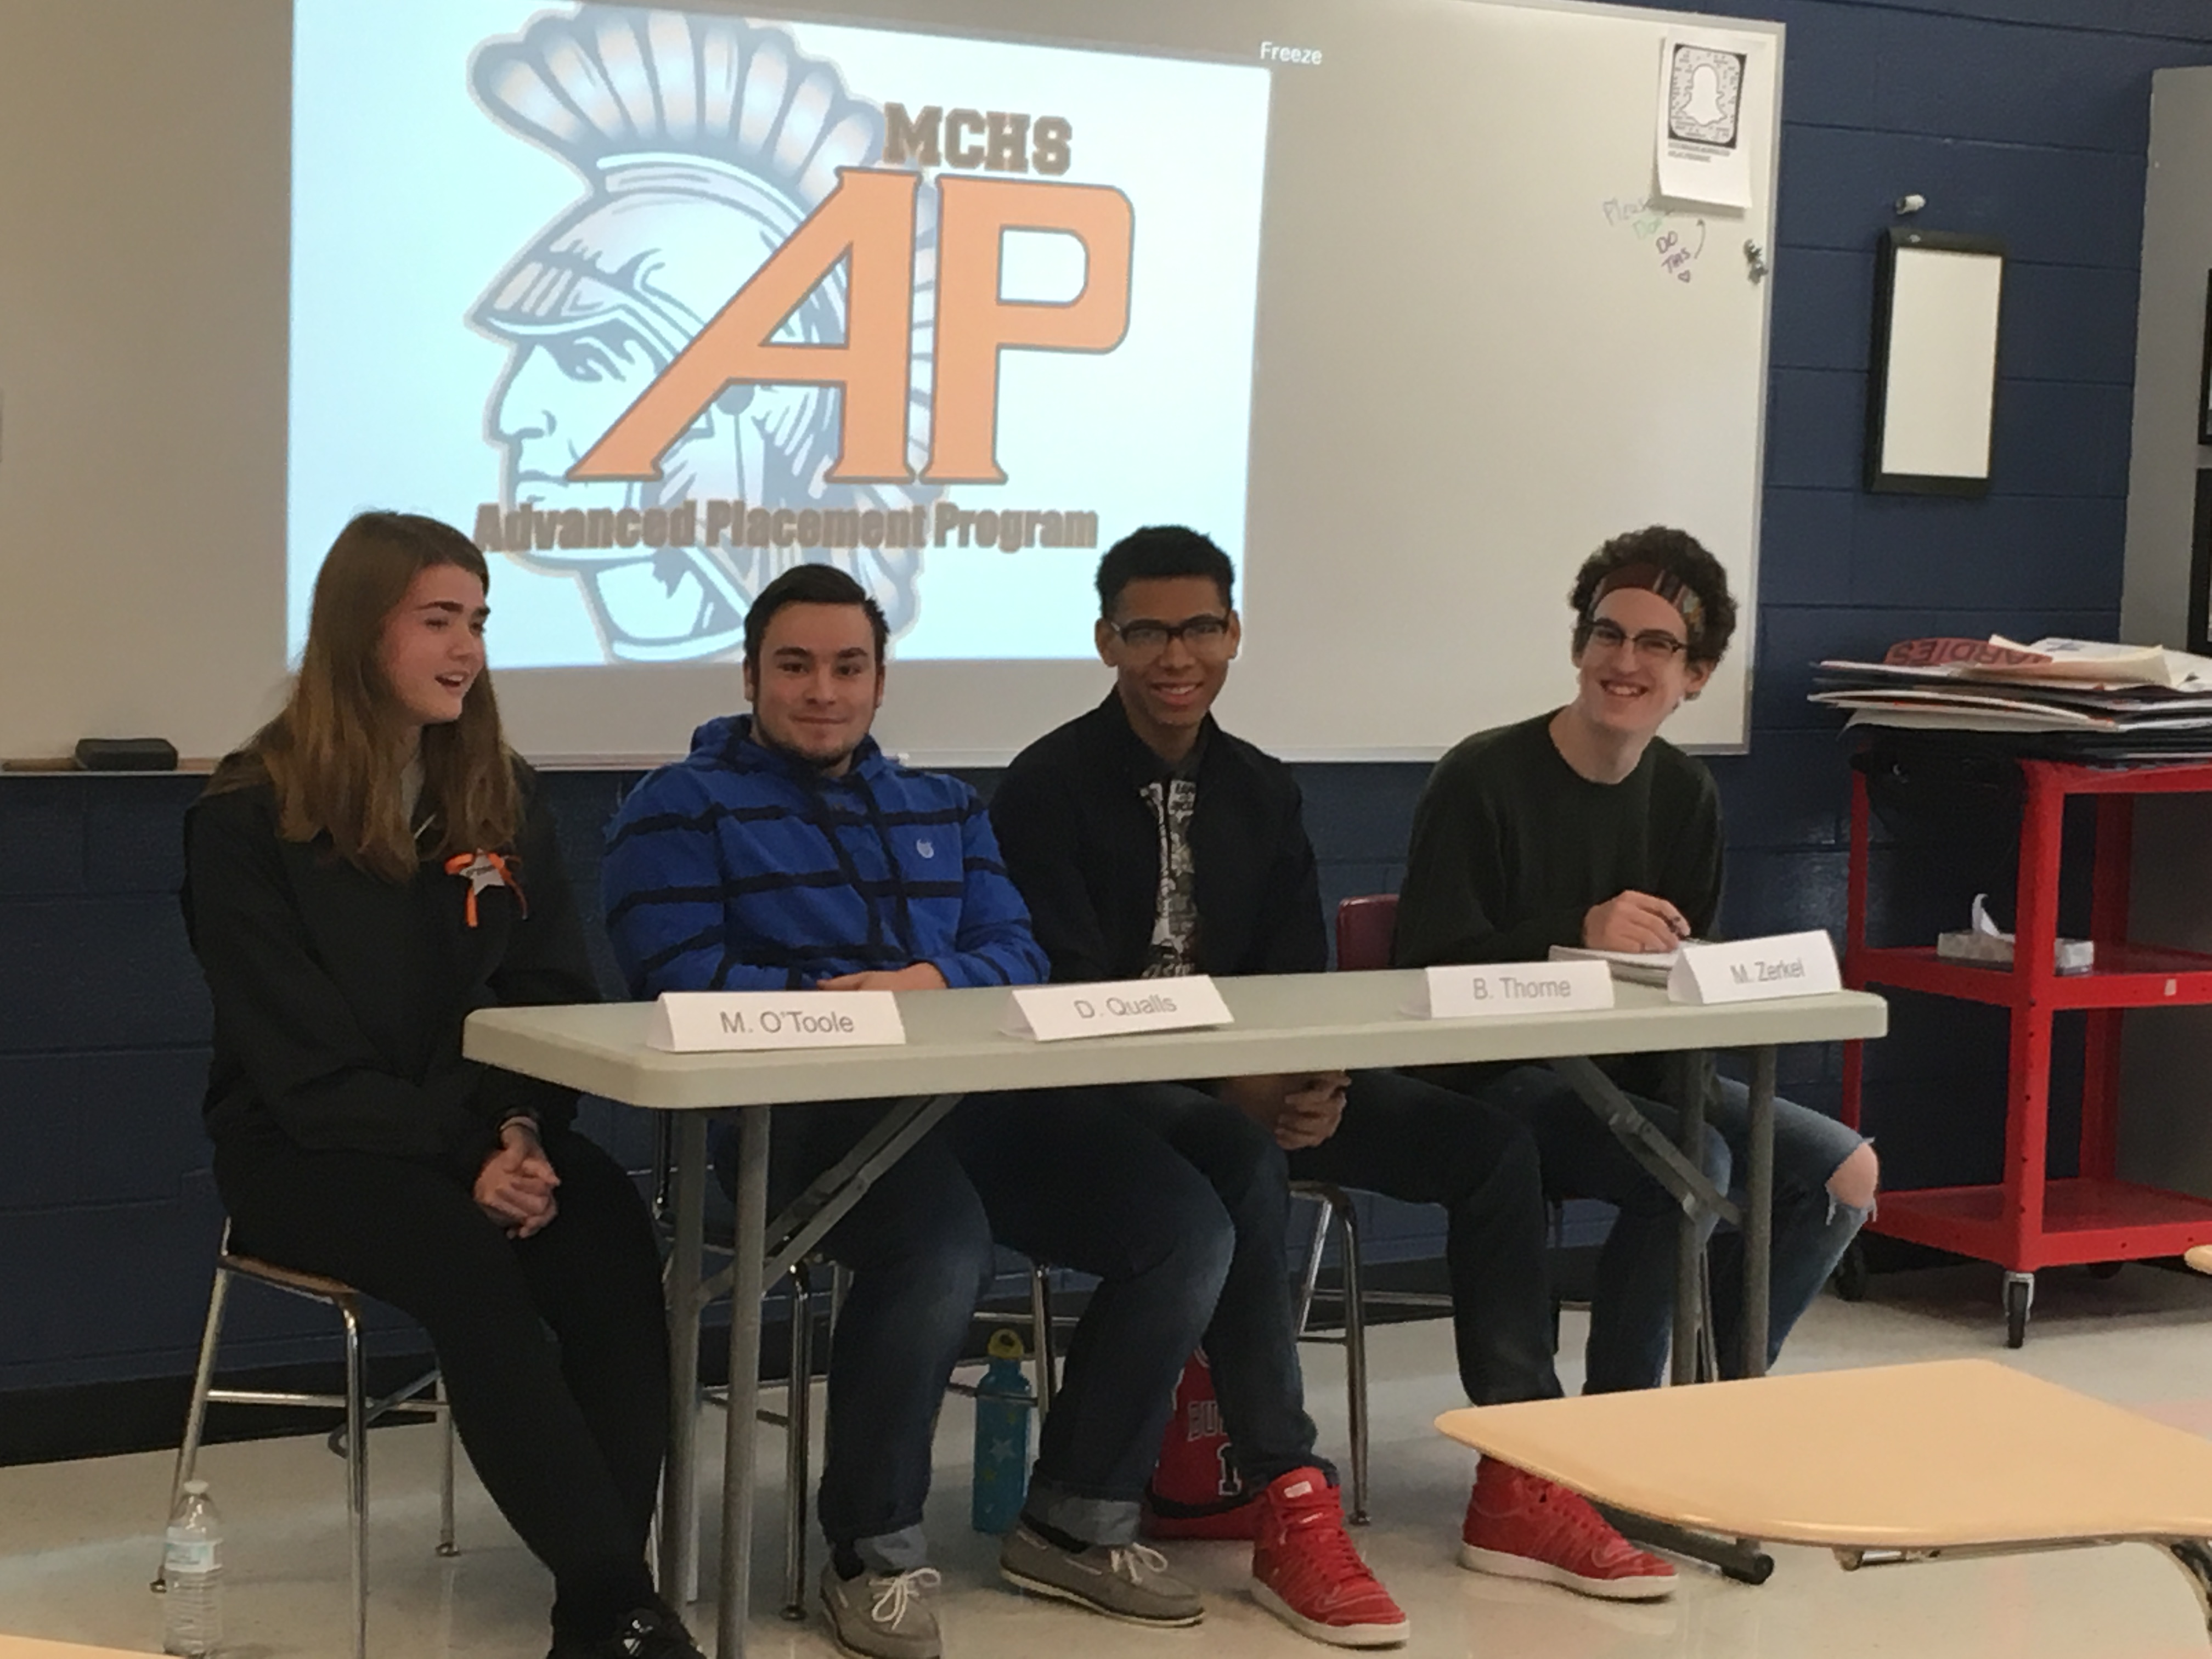 Students sitting at a panel in front of an AP logo